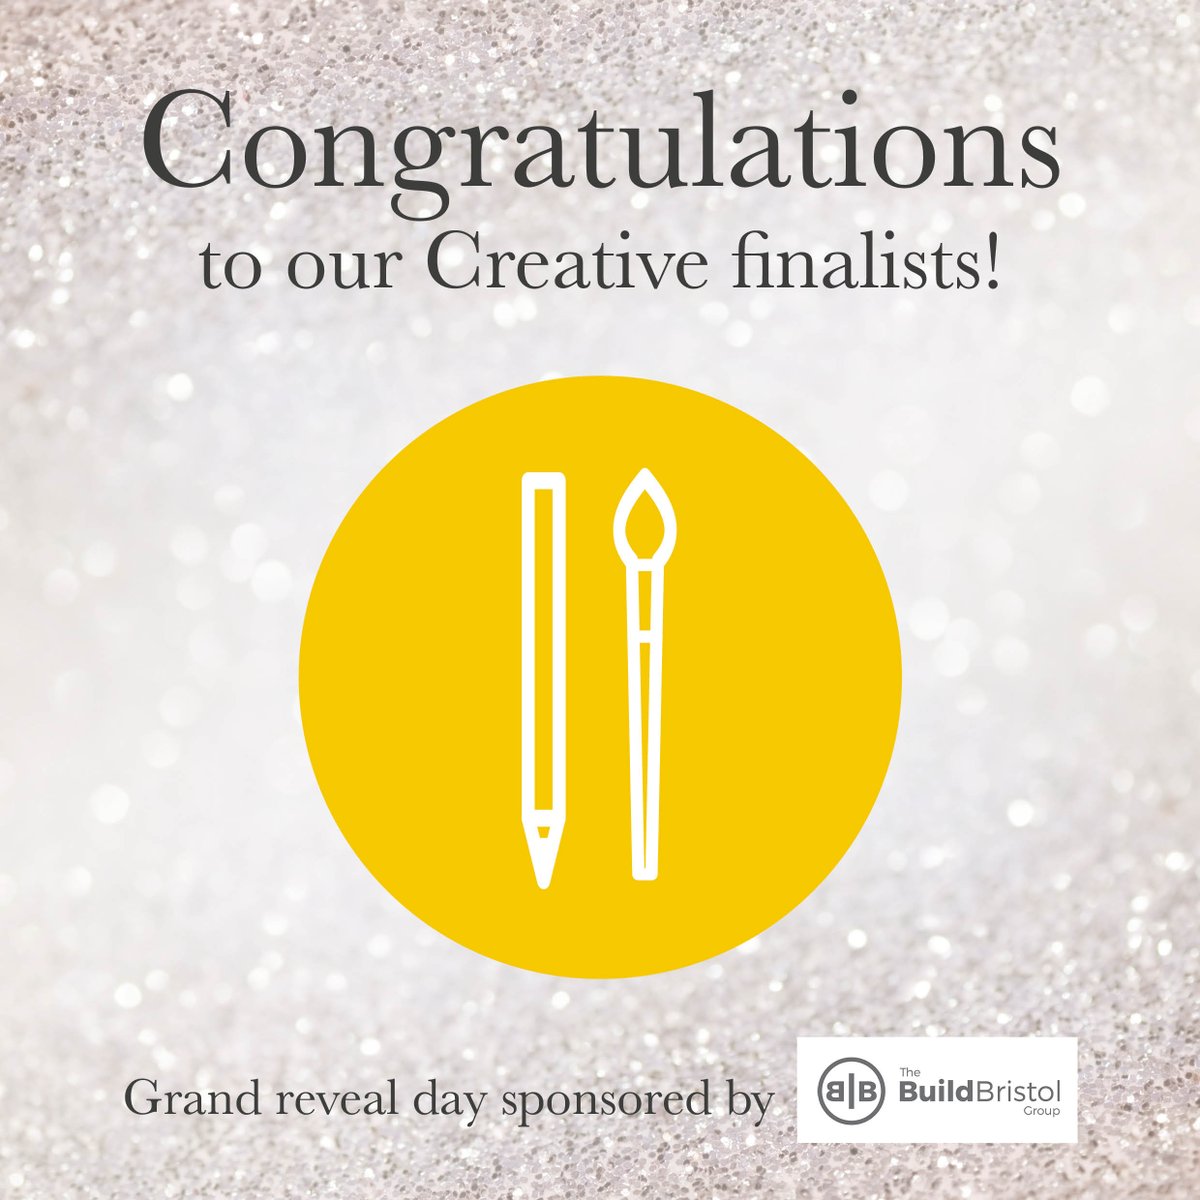 Our Creative Finalists are: @CreateUK, @EightySixStudio, @HarleysGlobal, @hidetheshark, @IstoriaGroup, @JonesMillbank, @ProctorsBristol, @studiogiggle and Vaughan + Company! 

Congratulations to all!  

Sponsored by: @spacesworks